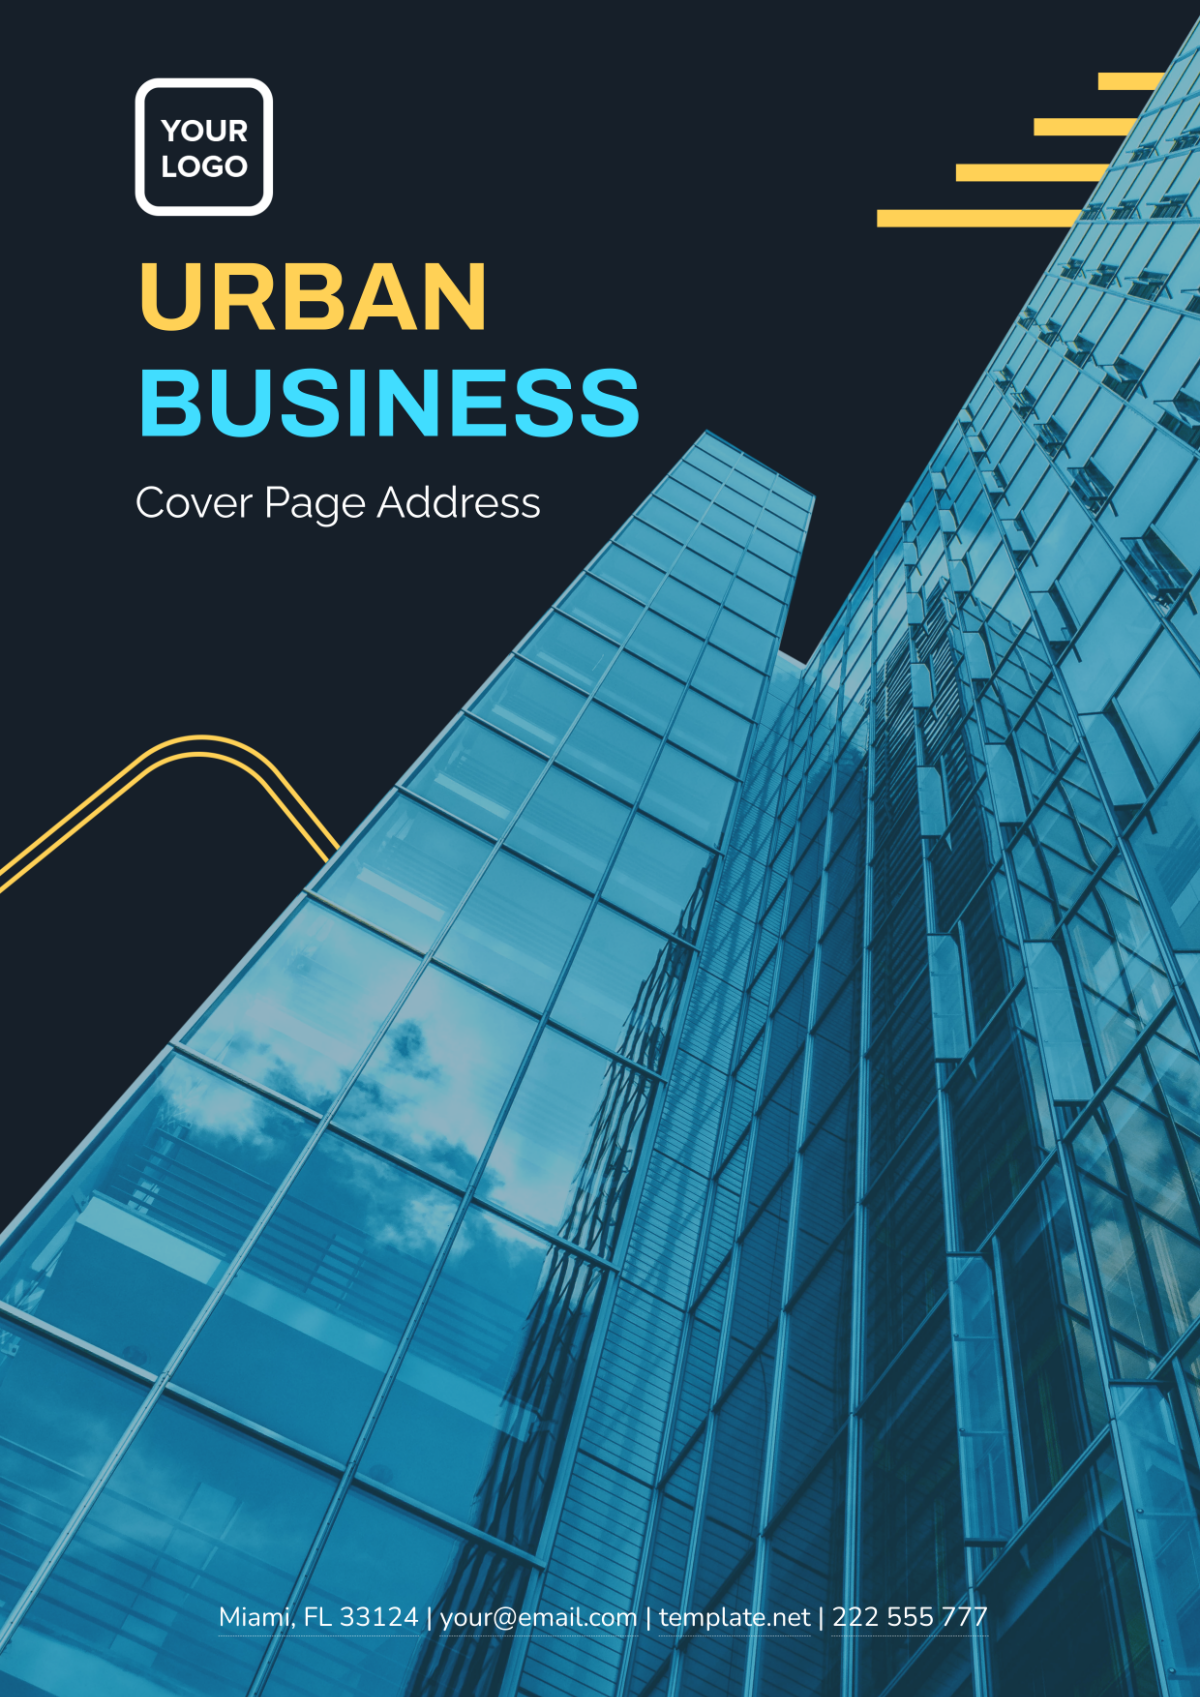 Urban Business Cover Page Address Template